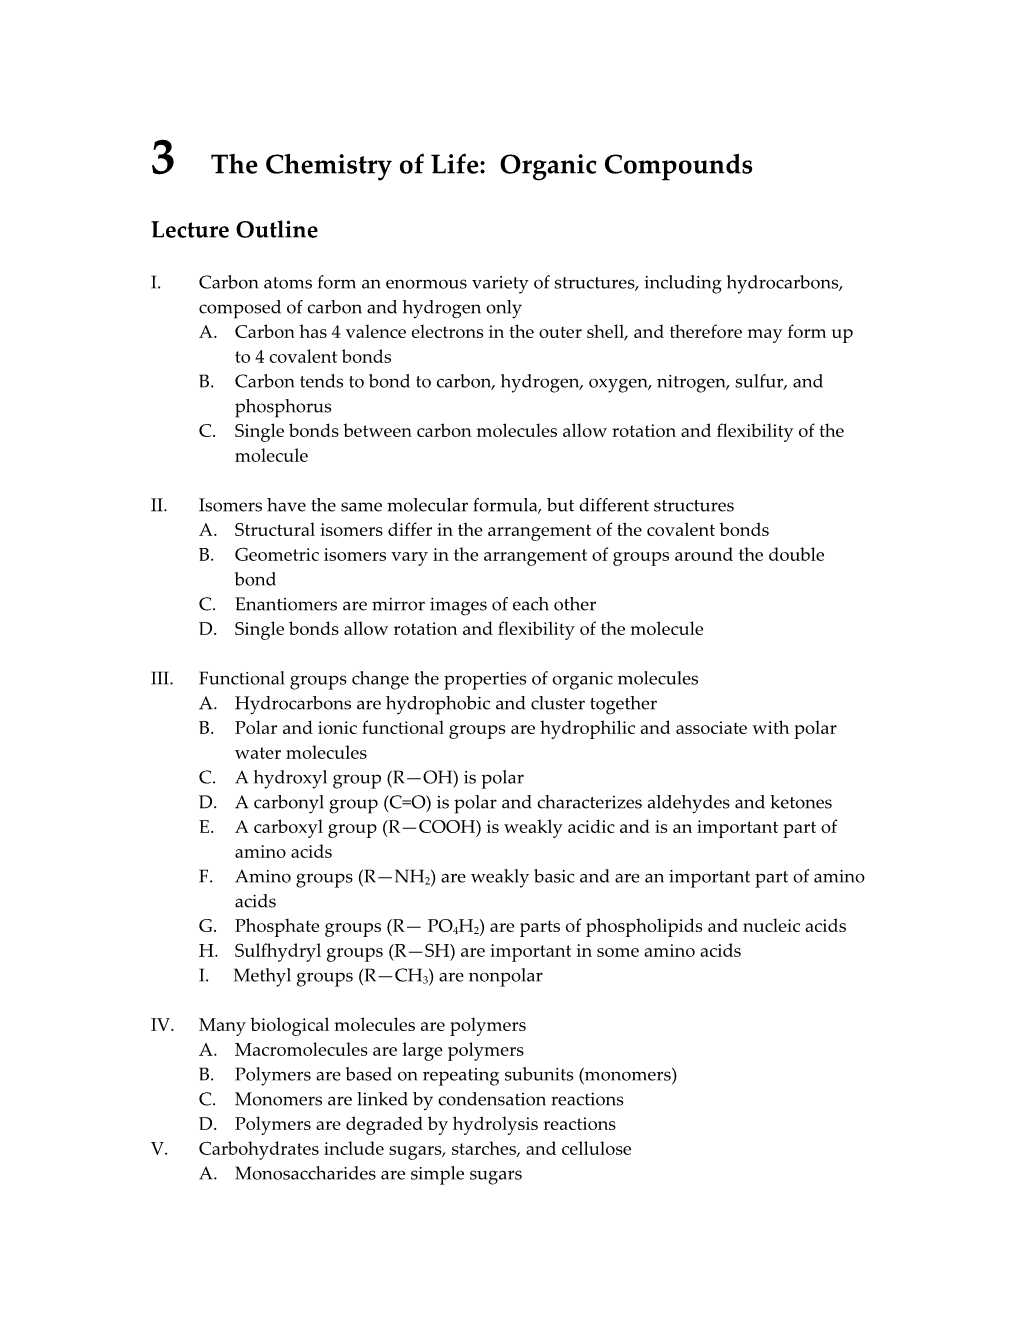 3The Chemistry of Life: Organic Compounds